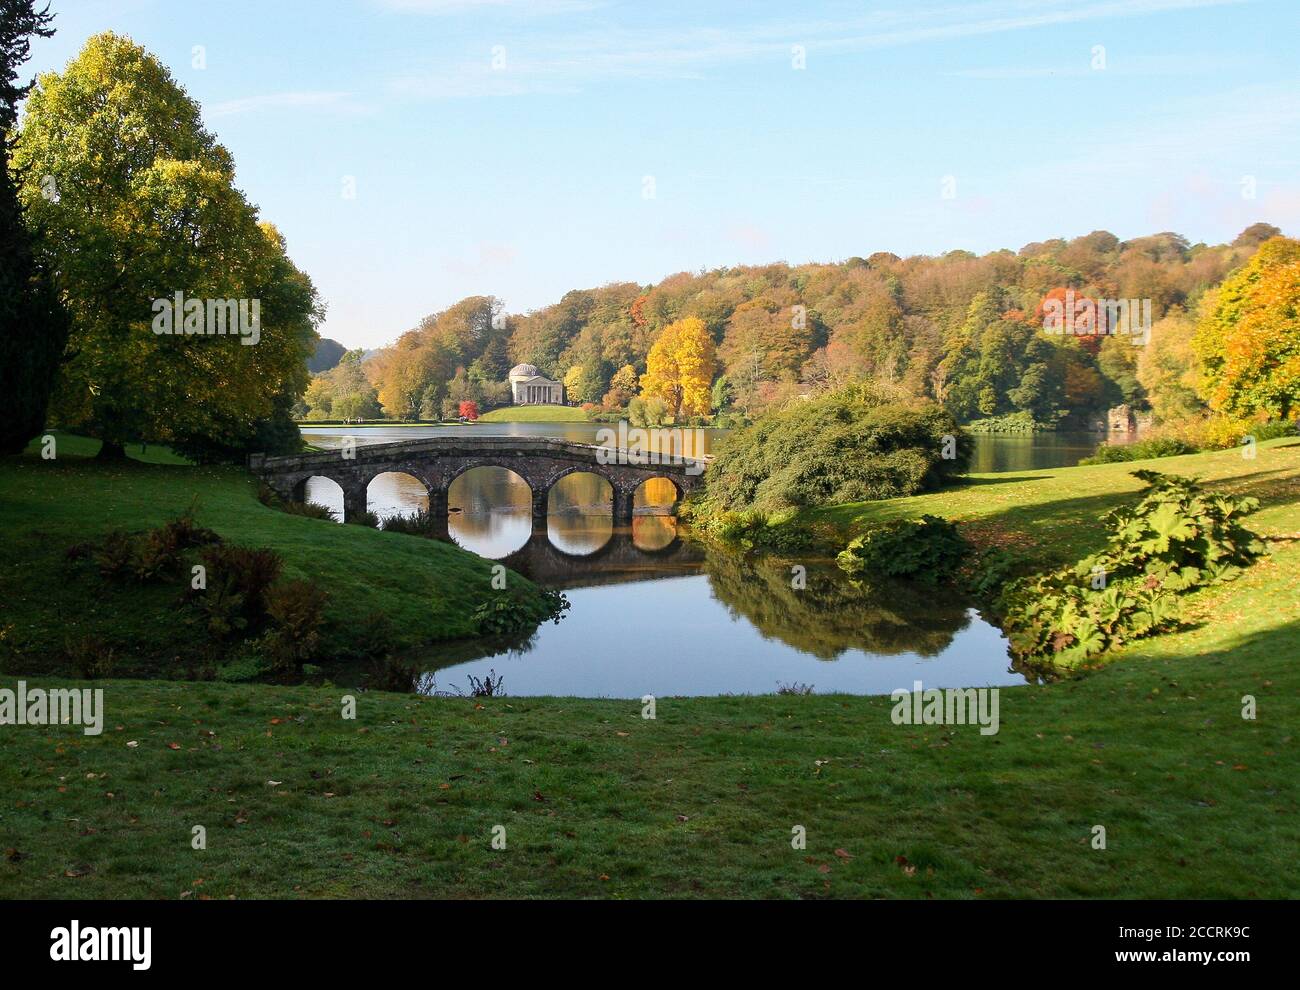 Stourhead, Wiltshire. Famous Gardens designed by Henry Hoare in the 18th century and now run by the National Trust in England. Stock Photo